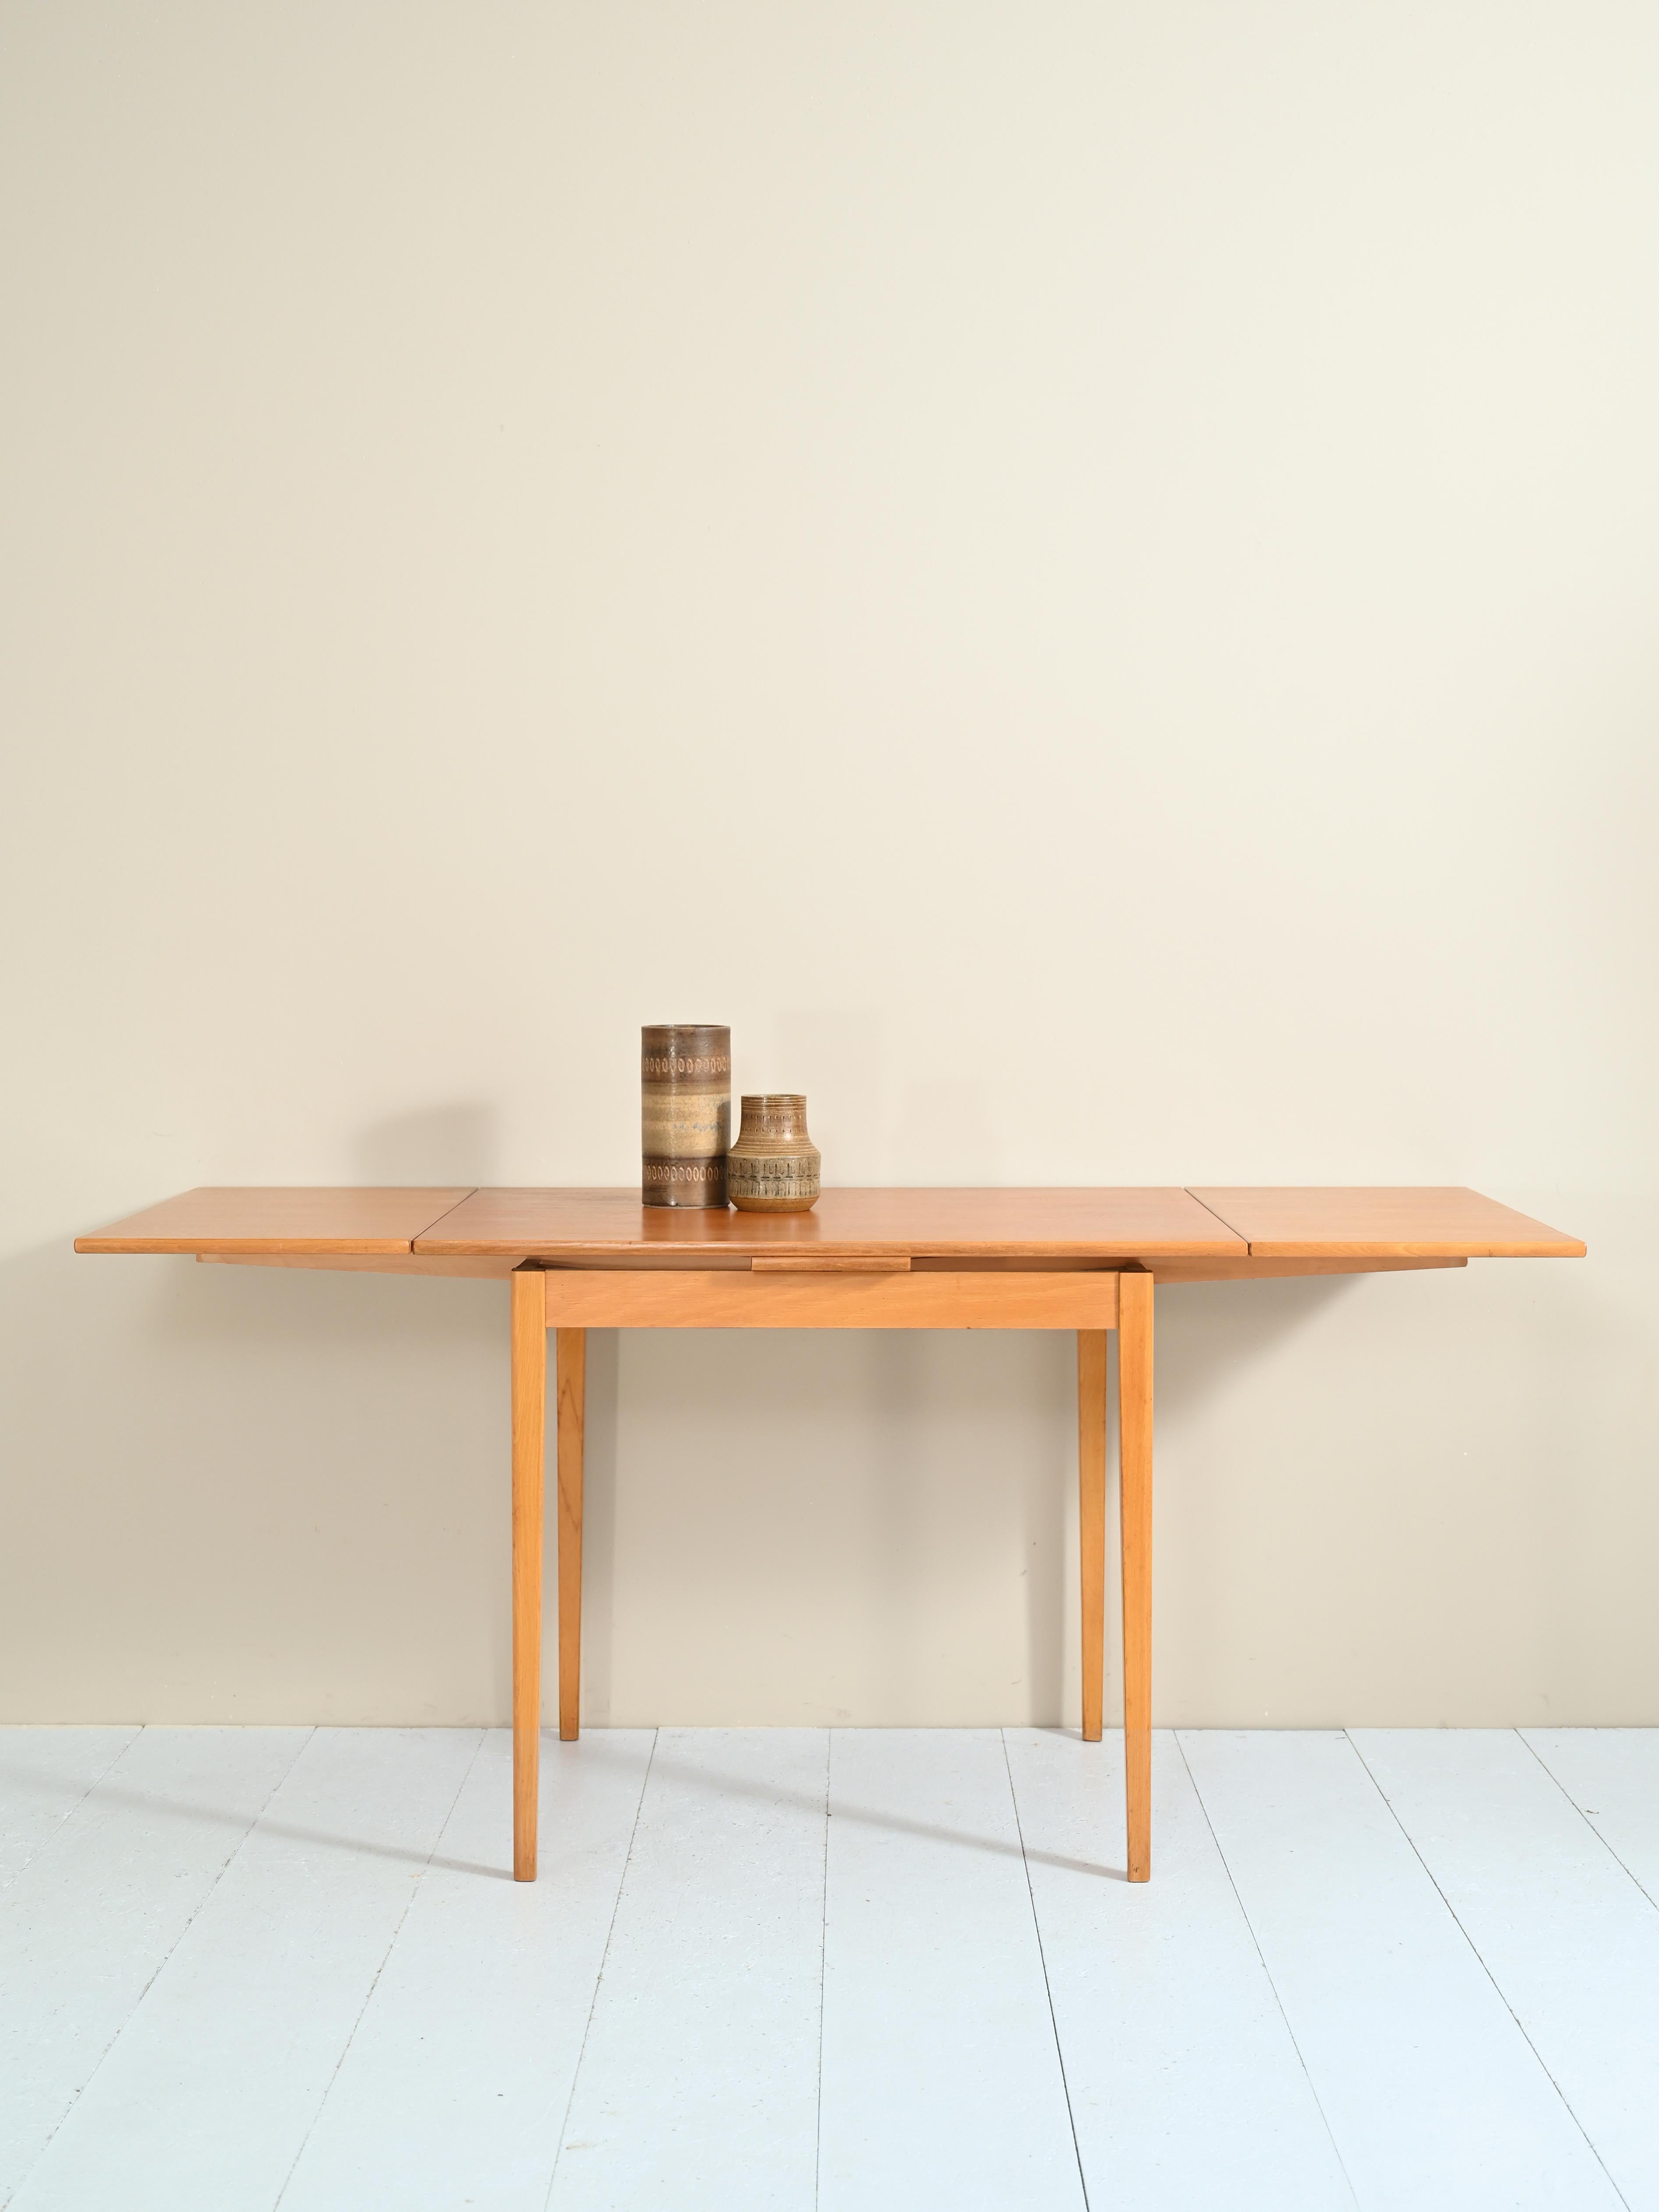 Original 1960s extending table.

Table dimensions closed
W94cm, D65cm, H74cm

Table dimensions open
W70cm, D65cm, H74cm

Formed by a teak top with two pull-out side extensions and an oak frame and legs.
This piece of furniture is versatile